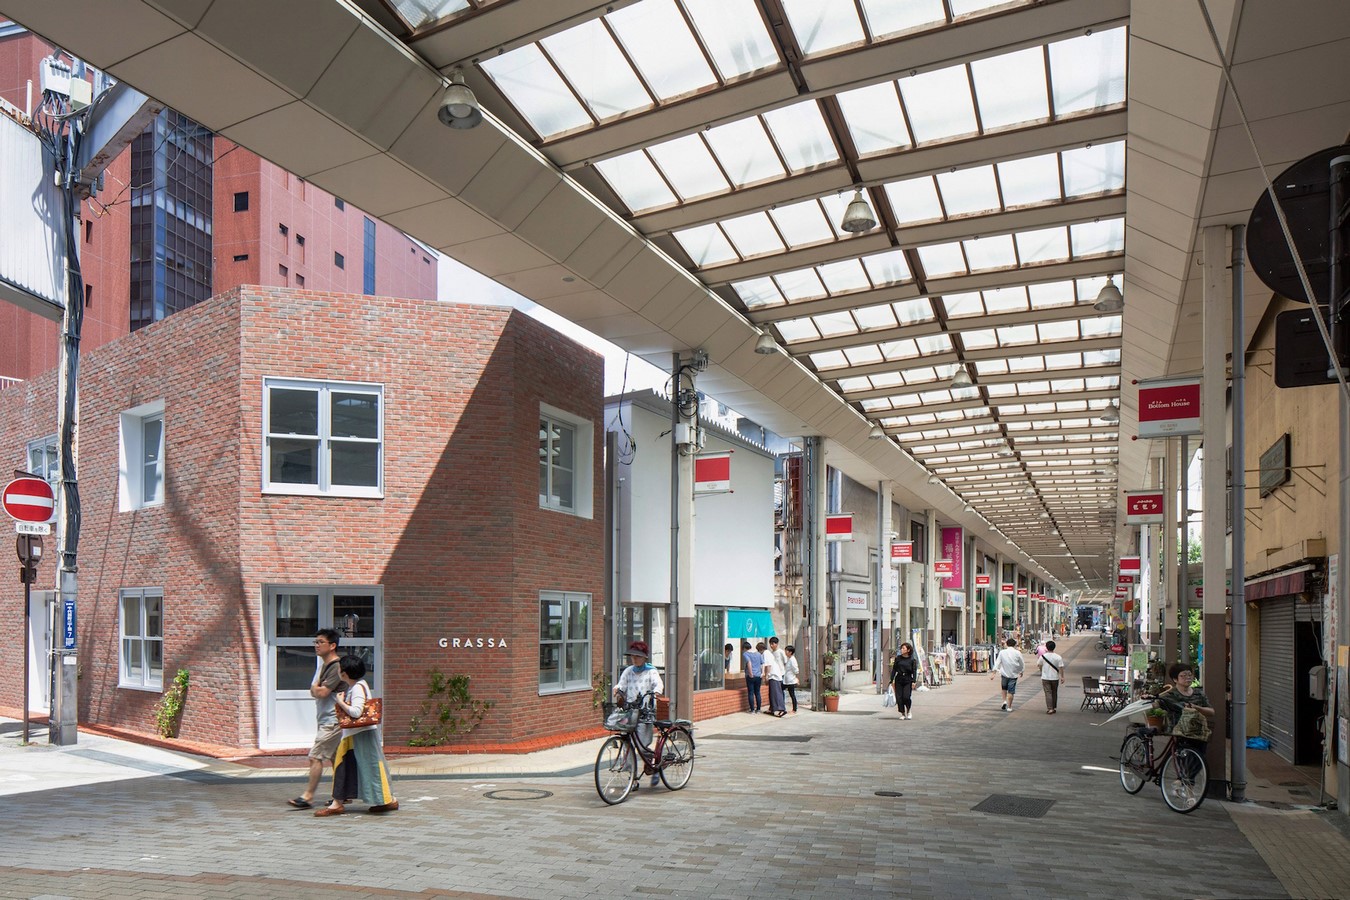 <span style="font-weight: 400;">The shopping street has undergone revival_©dezeen.com</span>